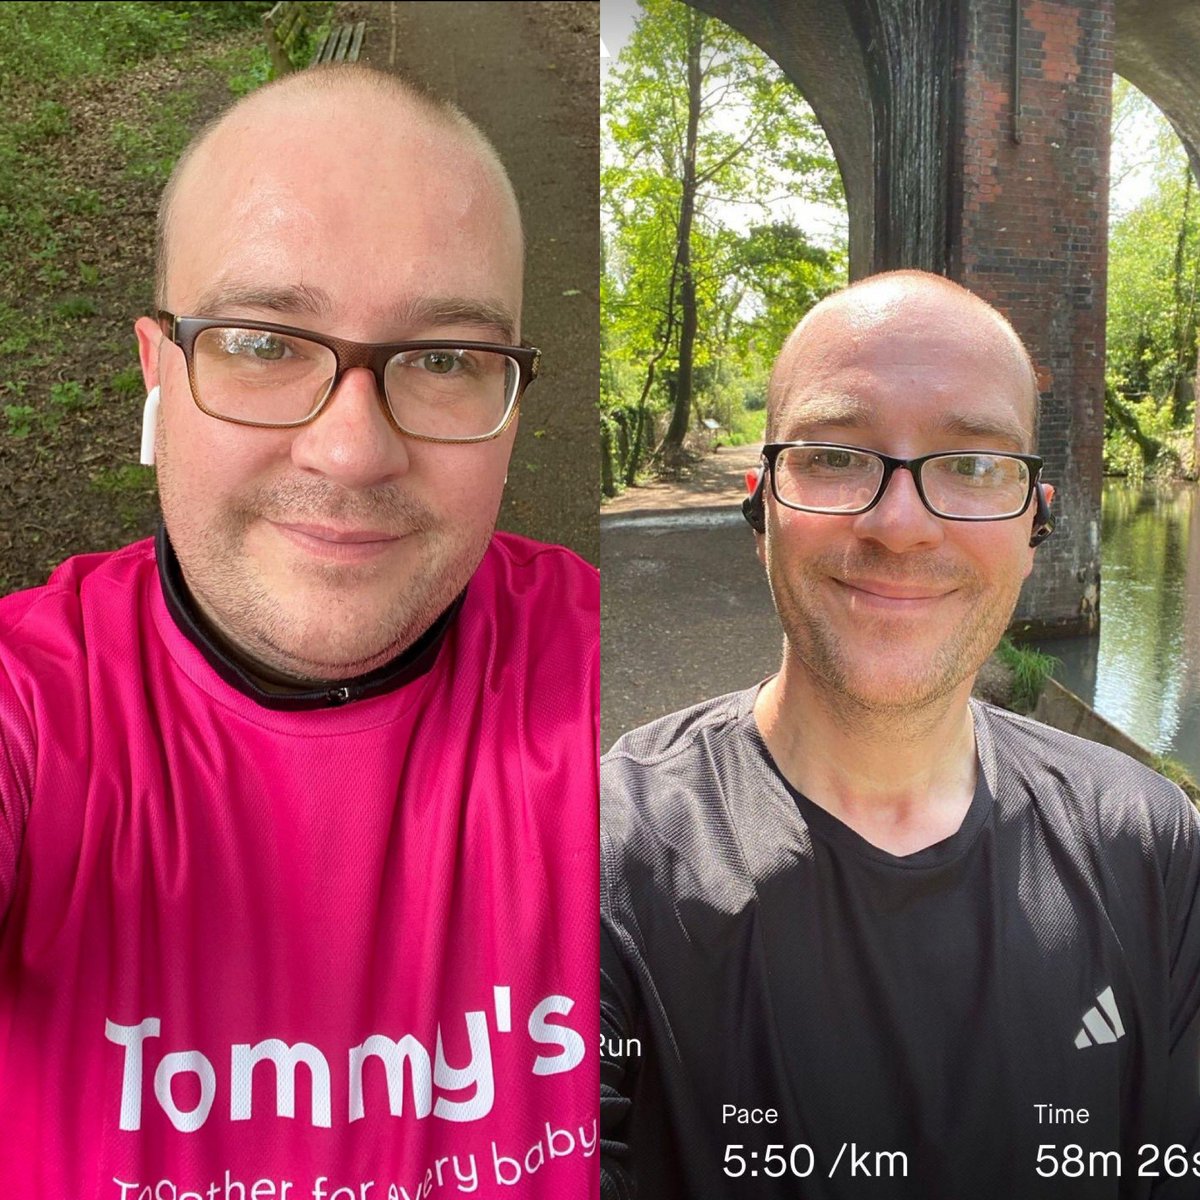 A year apart😮 crazy when I realise how far I have come. Over 6 stone lost with health eating and @huel 
Running for @tommys at @LLHalf saved my life, best thing I ever did, go for it what you you got to lose🏃🏻‍♂️ #weightloss #mentalhealth #goforit